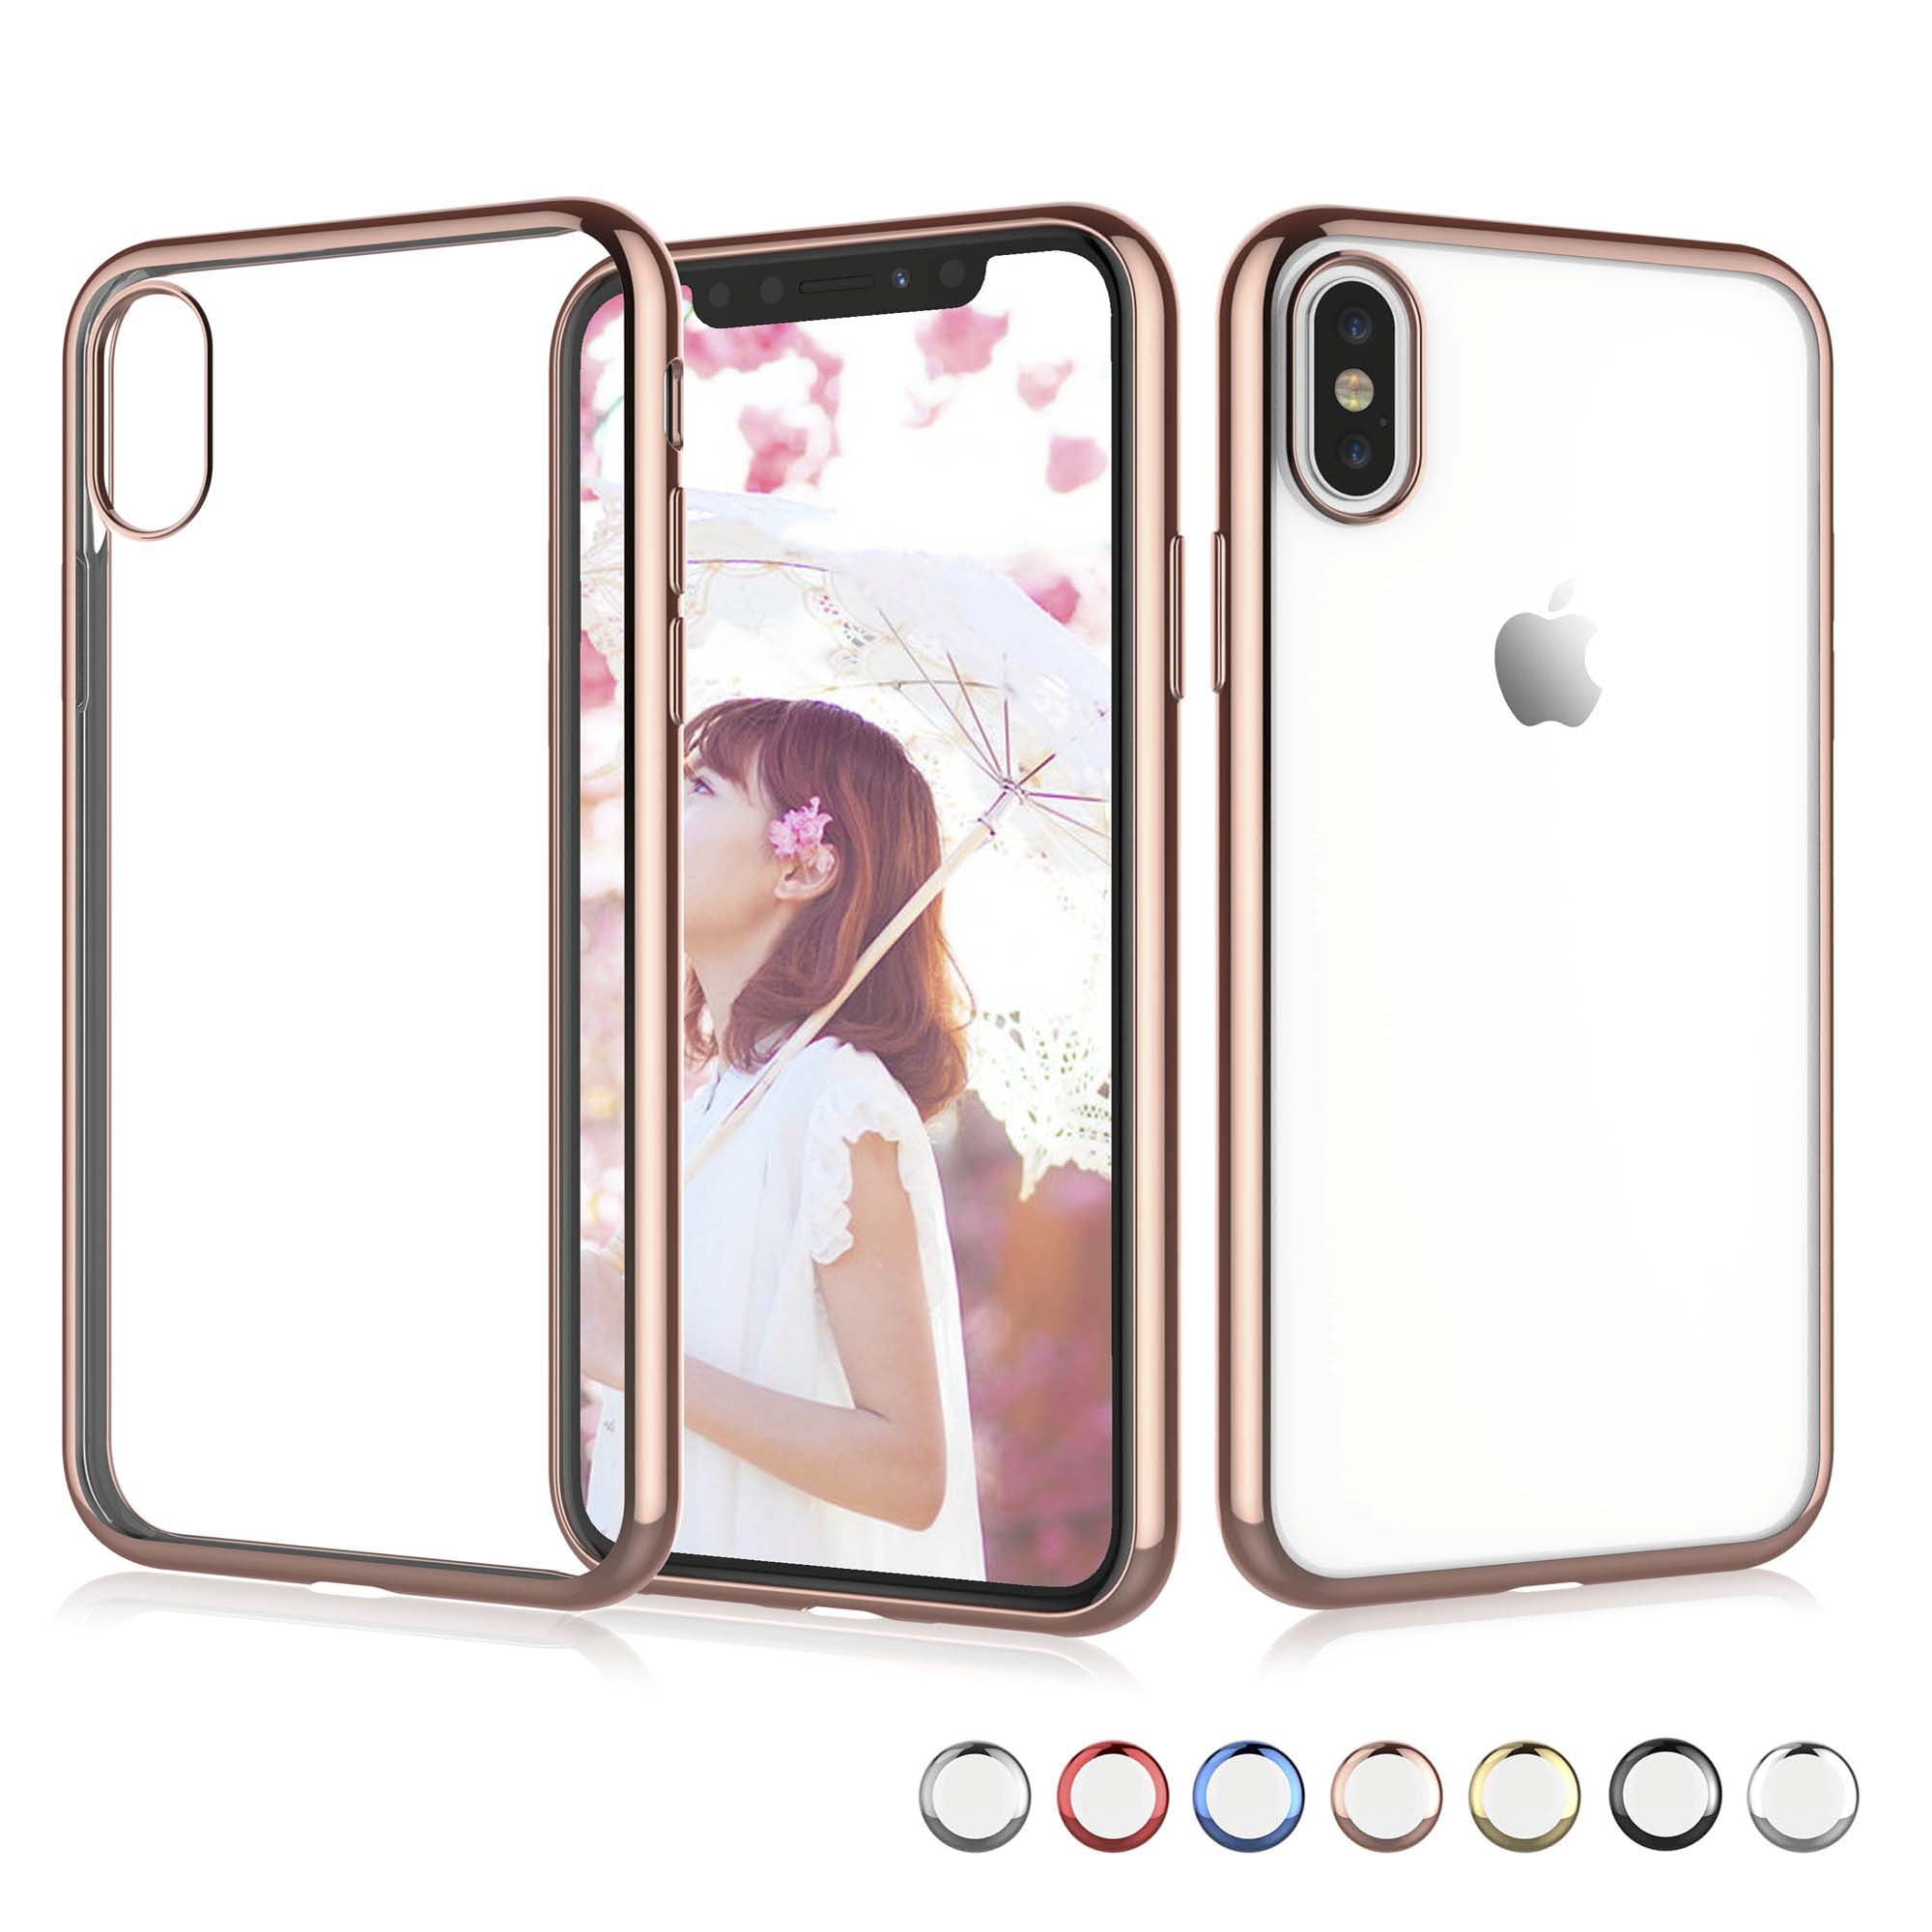 Njjex Case for 6.5" iPhone Xs Max Slim Clear Cover, Soft Flexible TPU Cover for 6.5 inch Xs Max(2018) (Rose Gold Frame)